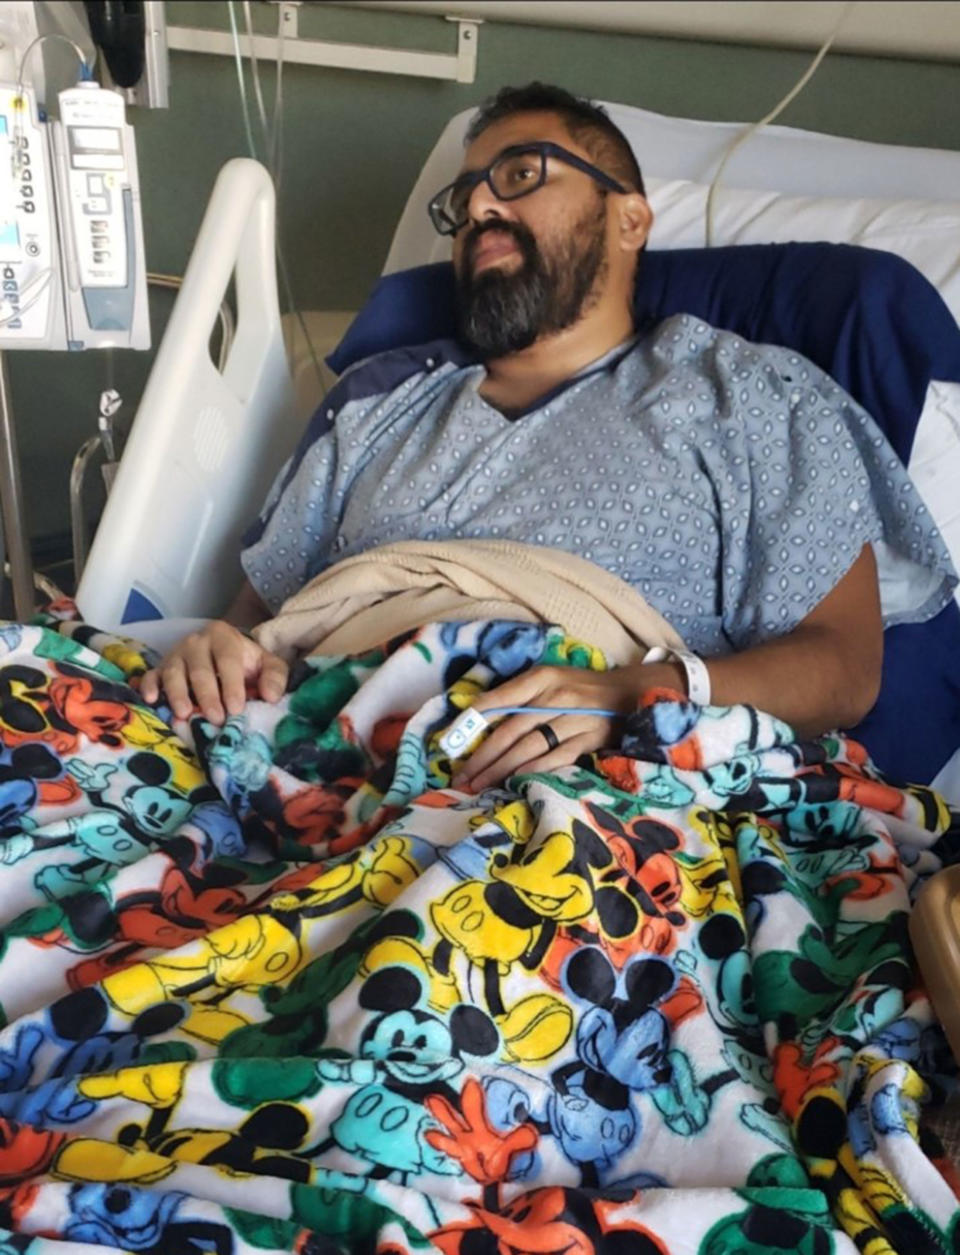 Jose Leon in hospital with valley fever (Courtesy Leon﻿ family)